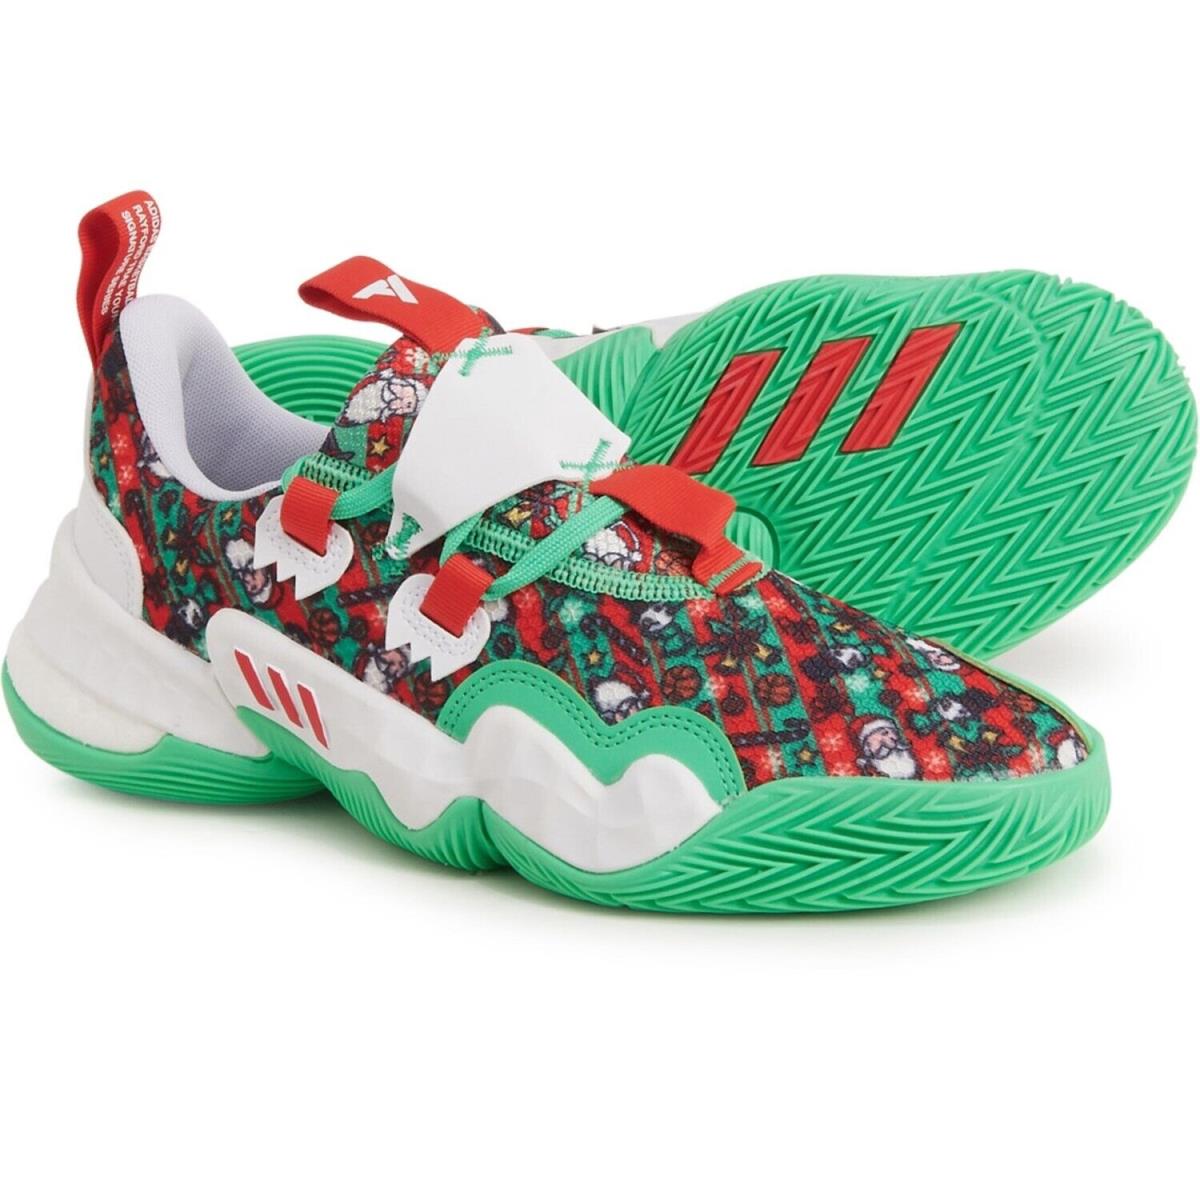 Adidas Trae Young 1 Shoes Men Sz 6 / Women Sz 7 Green Red White Christmas GY0305